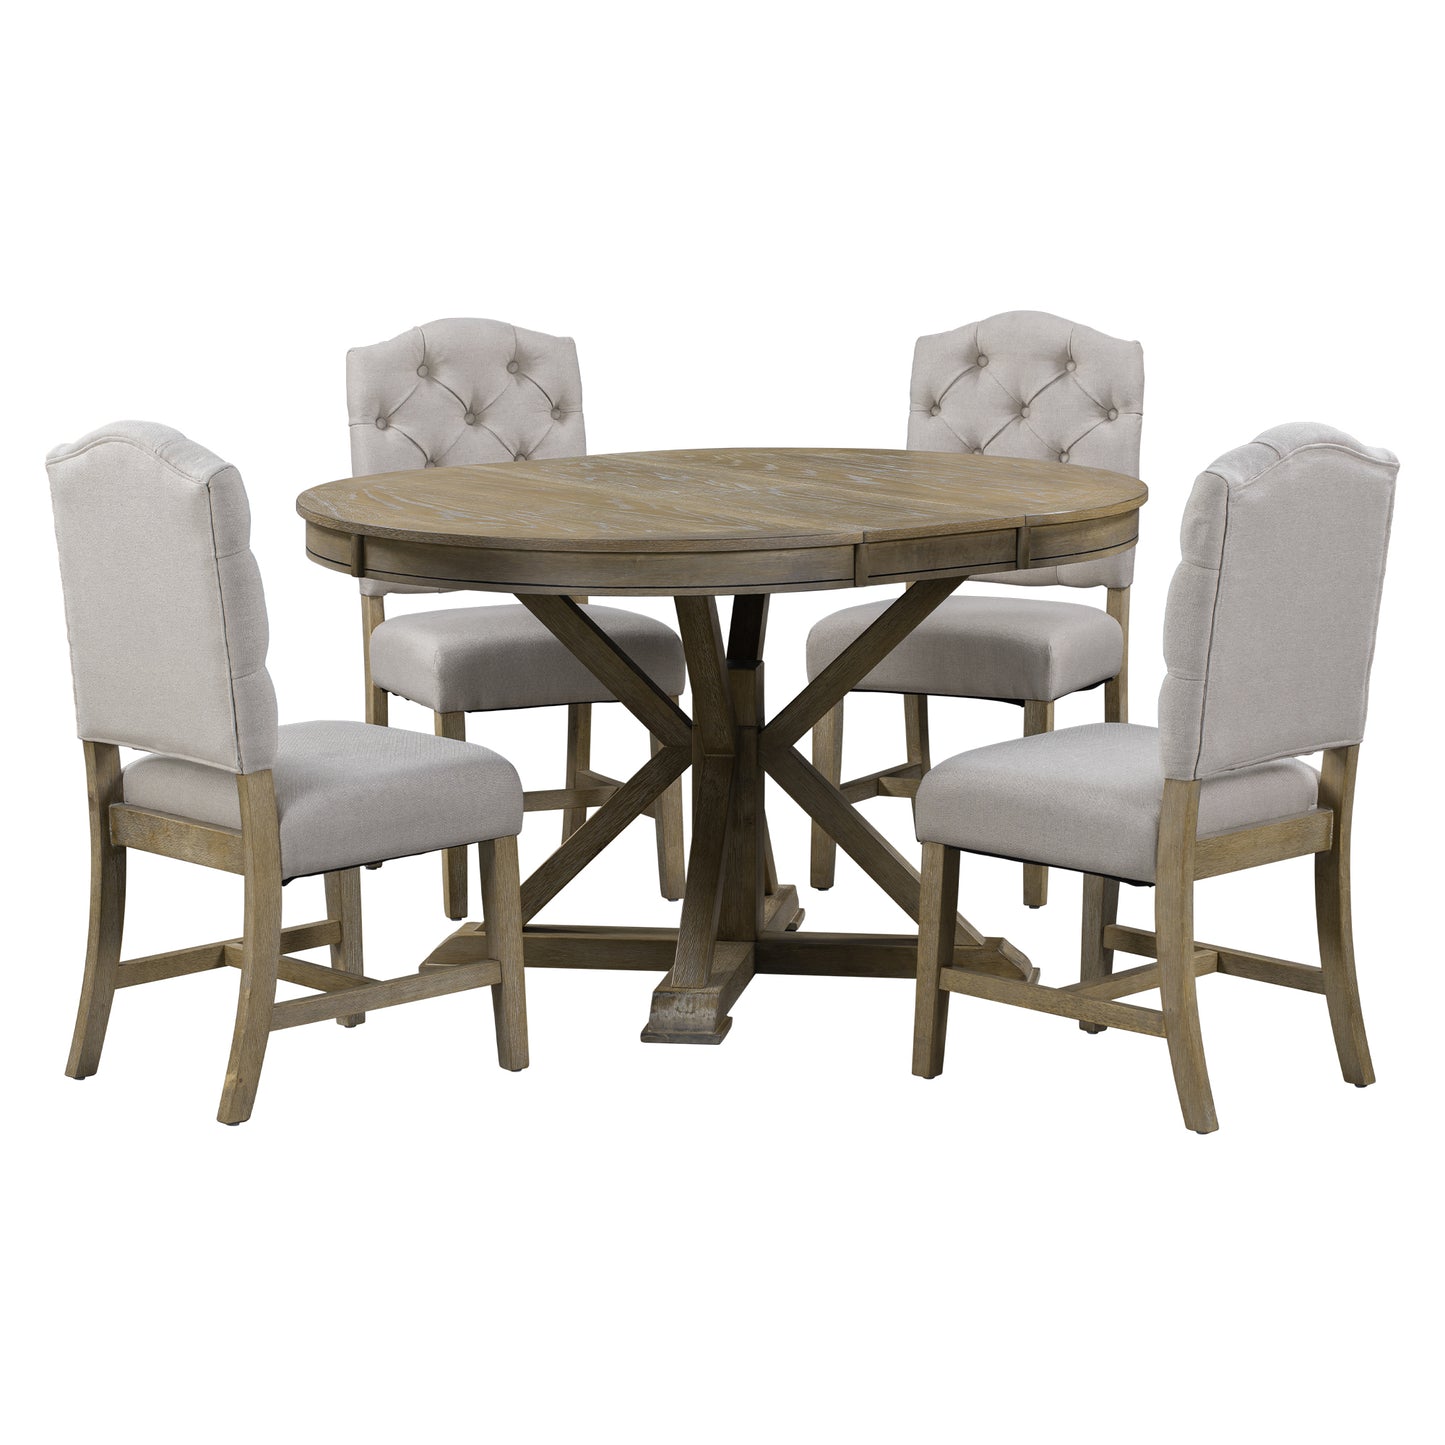 Upholstered Retro Style Dining Table Set with Extendable Leaf and 4 Chairs